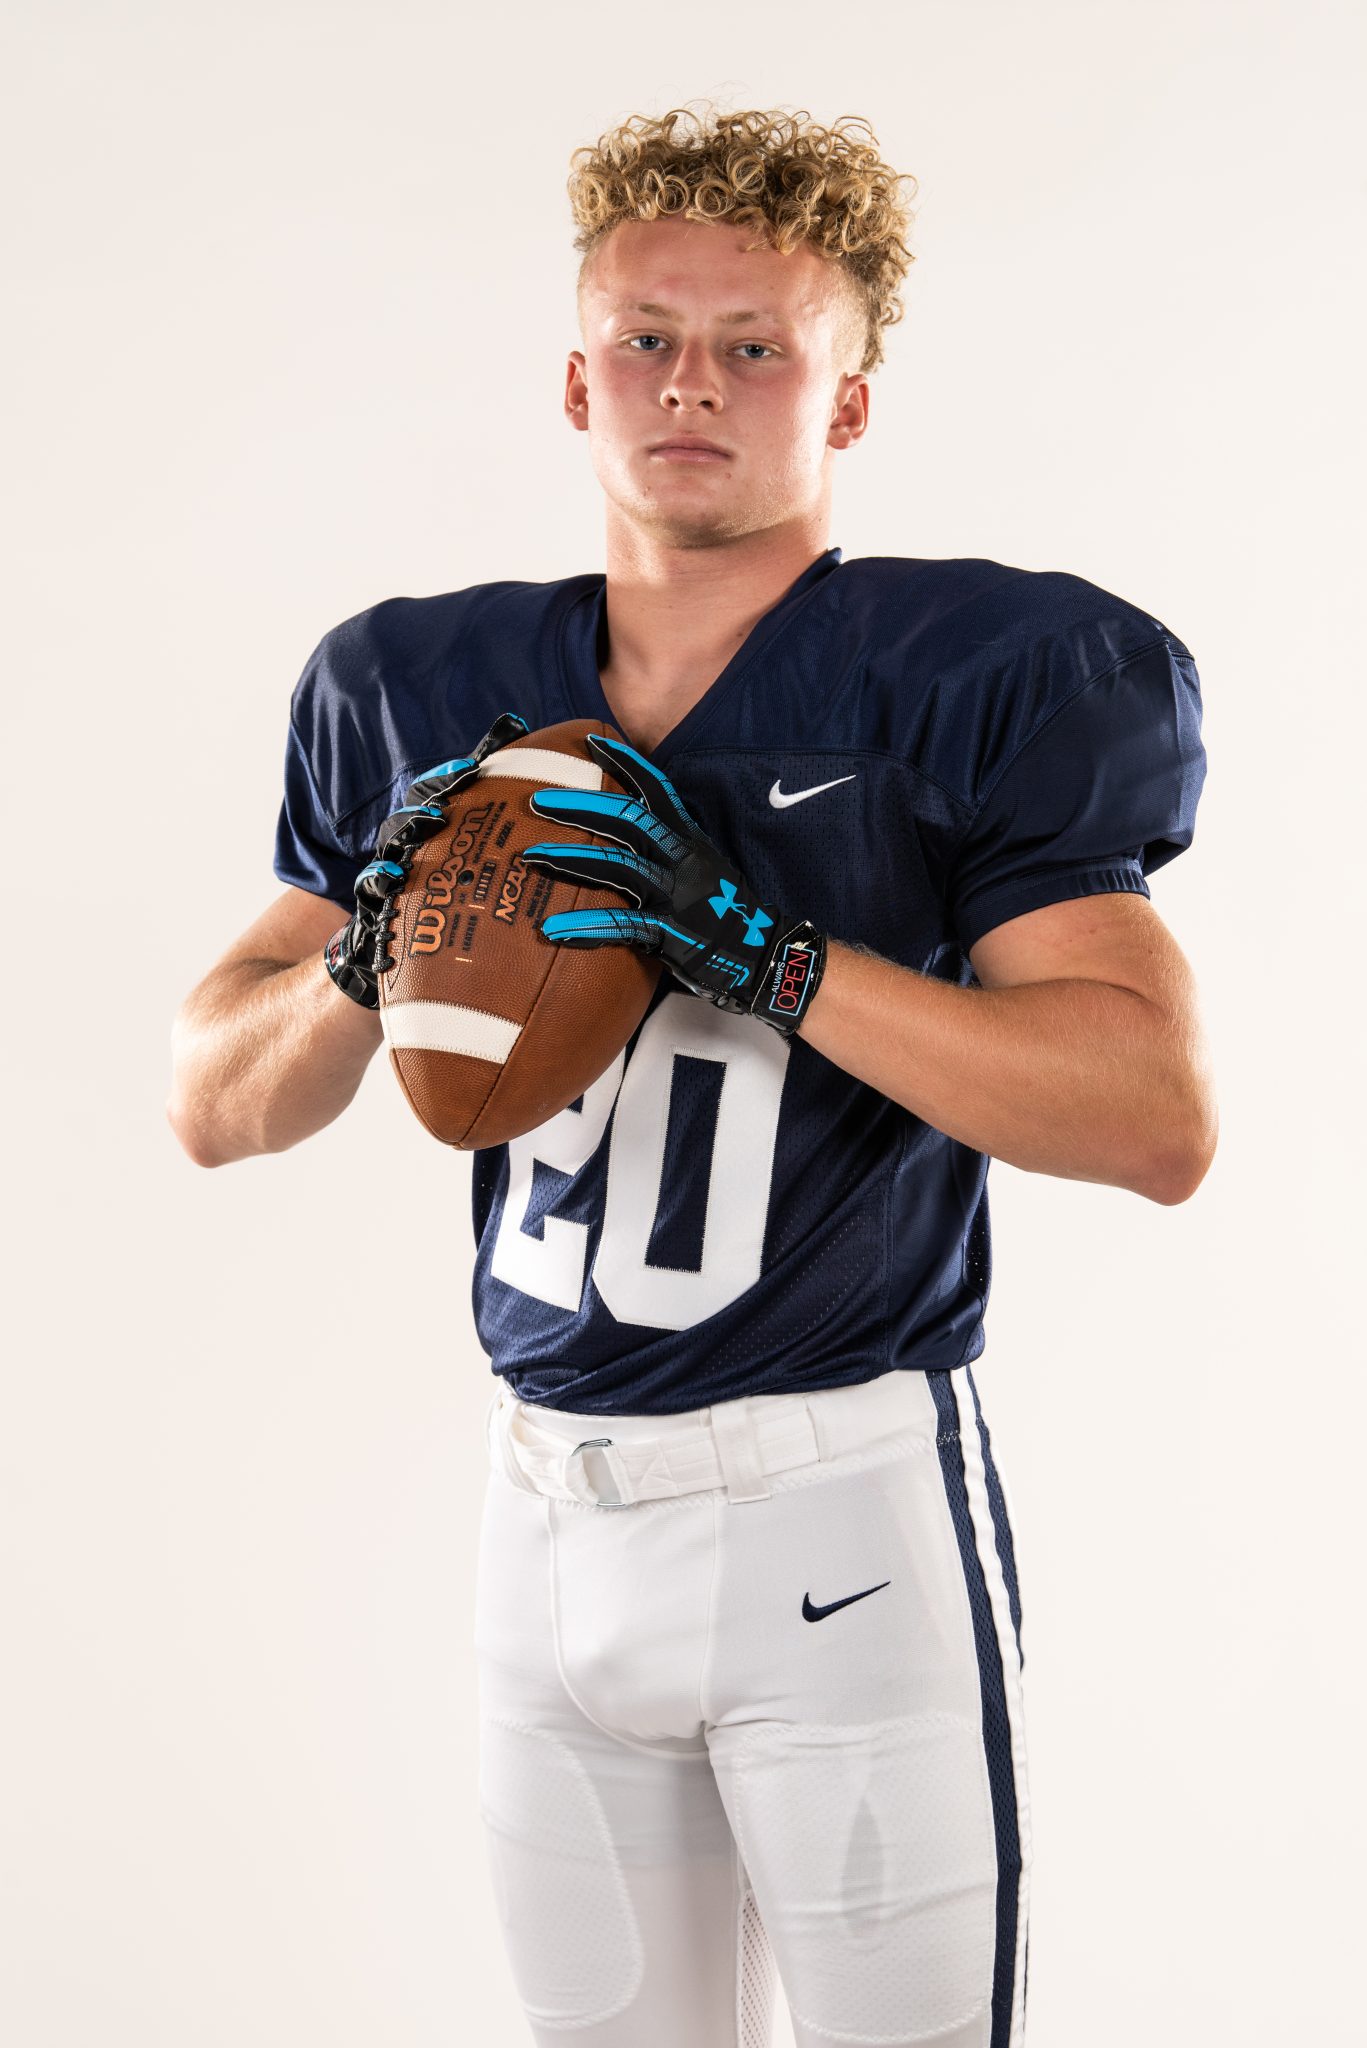 PCA Senior Selected for All State Football Team